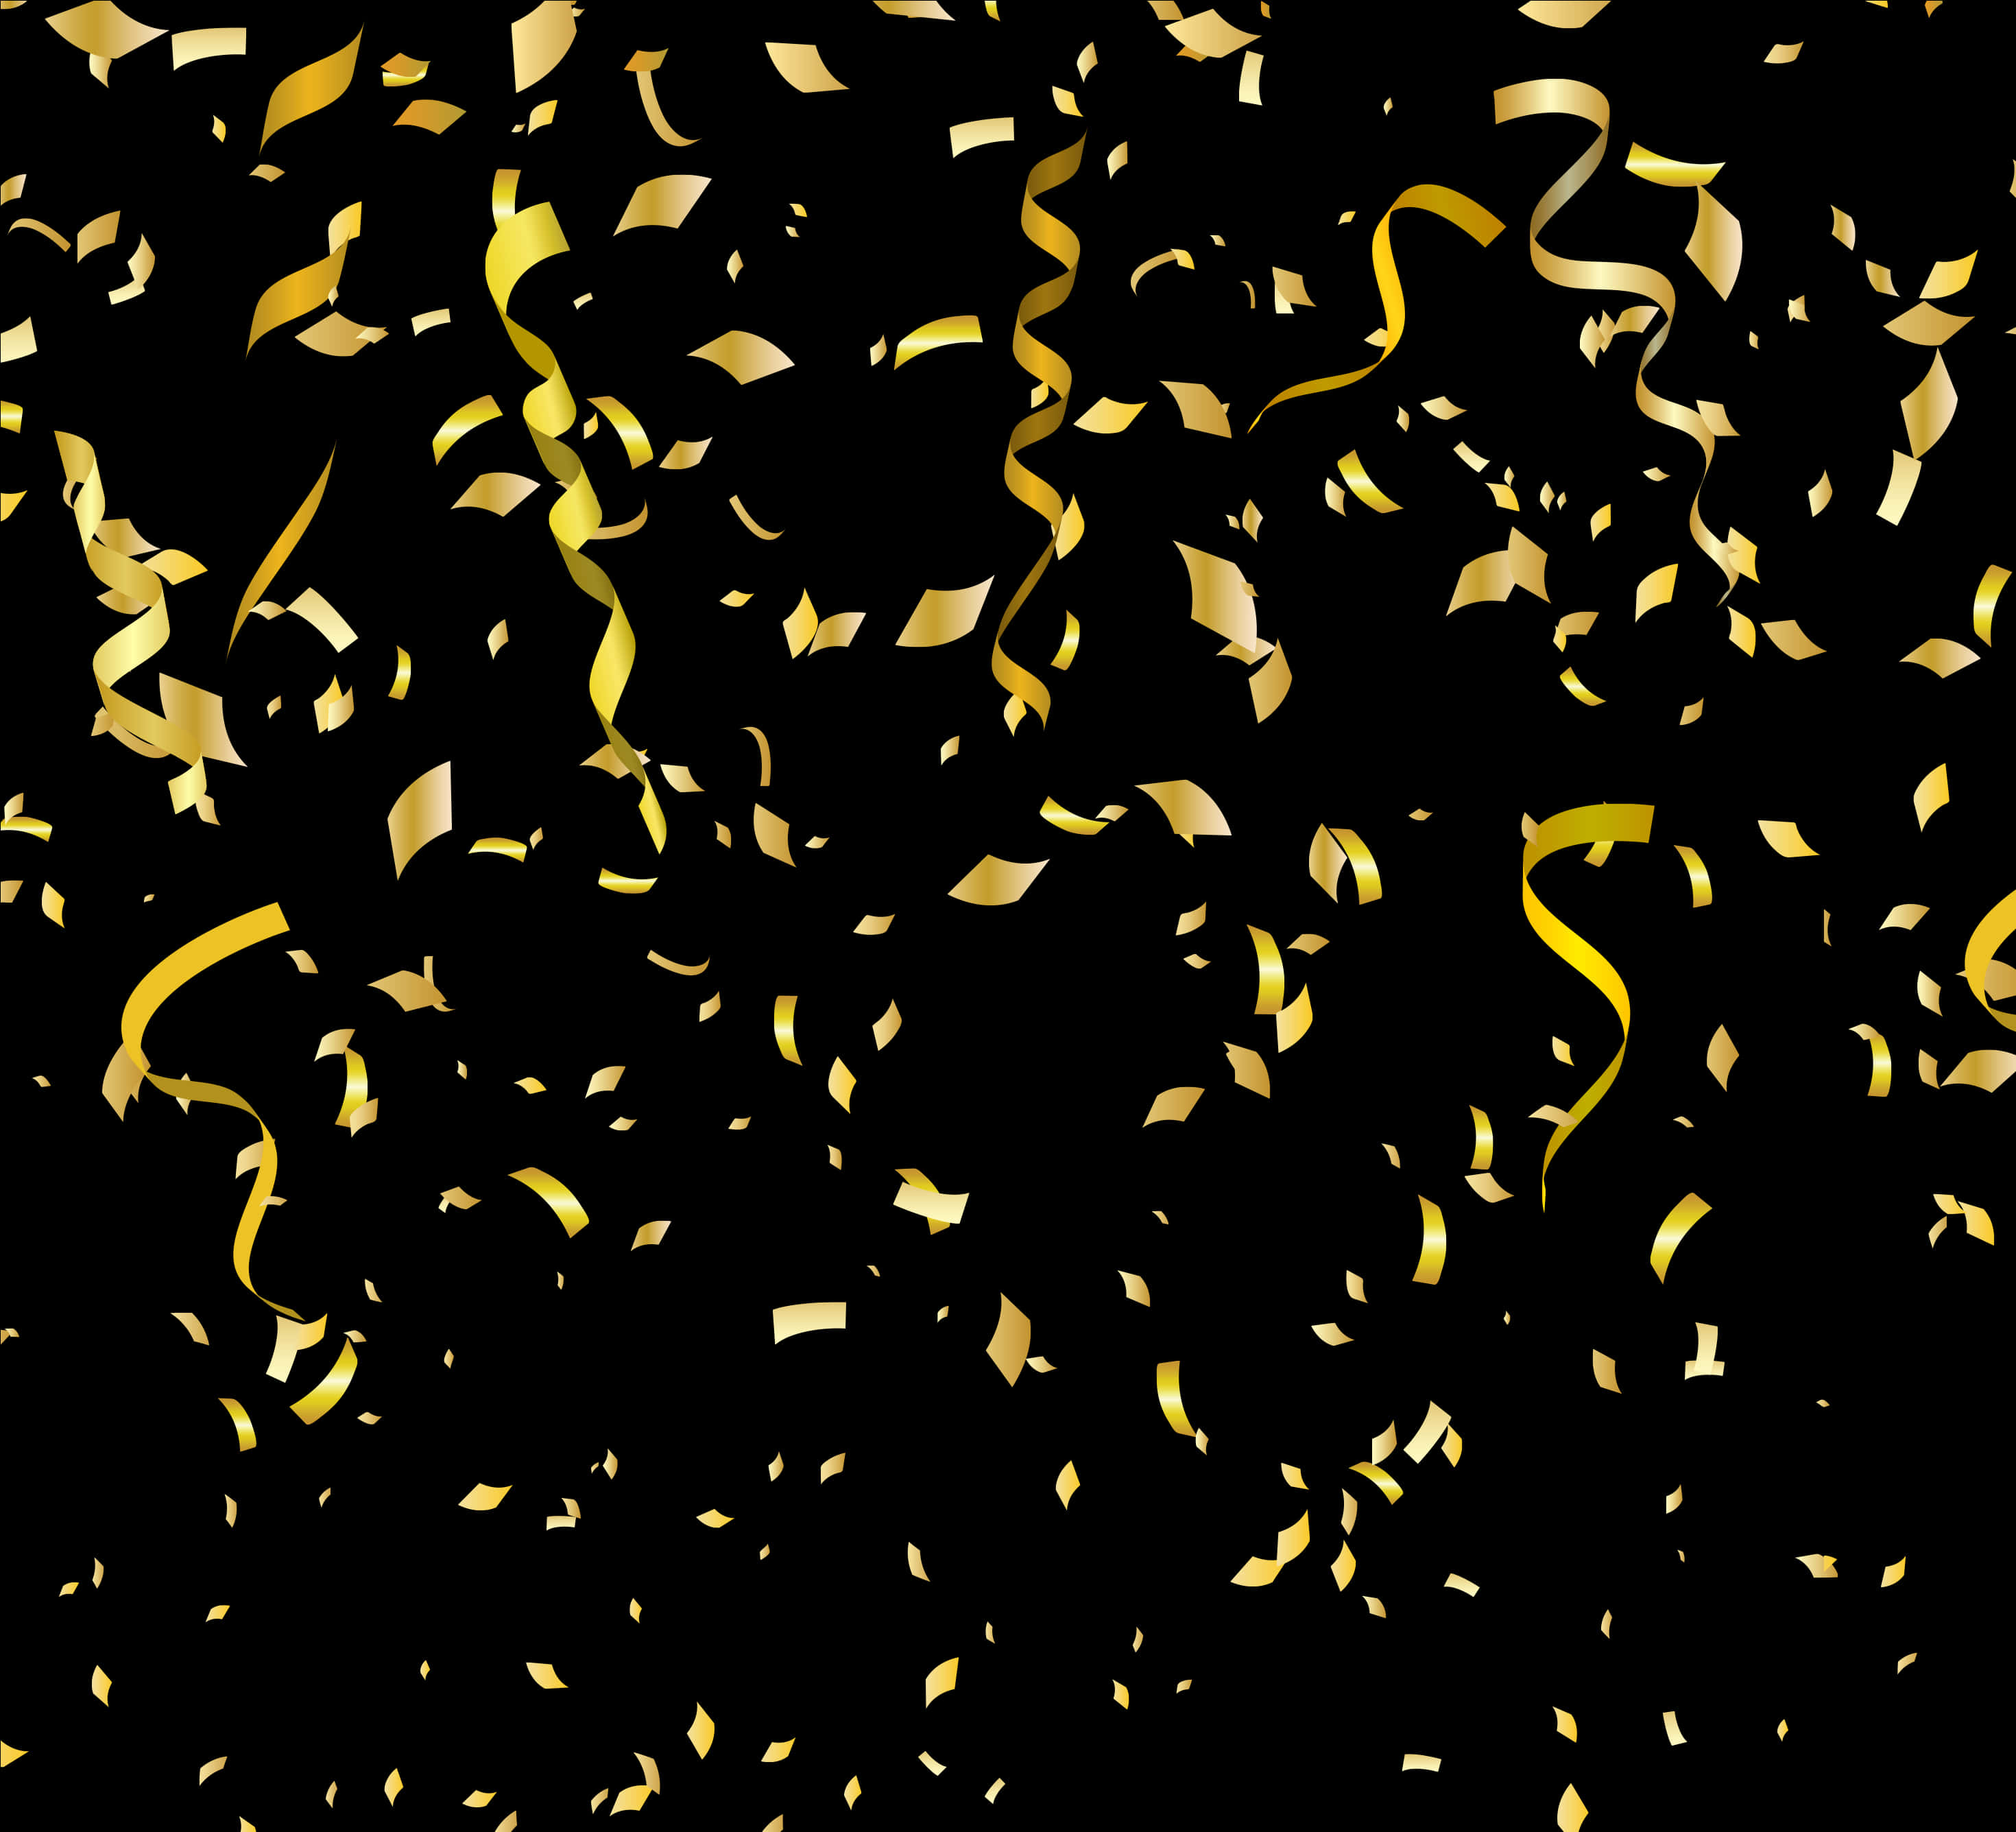 A Gold Confetti Falling On A Black Background